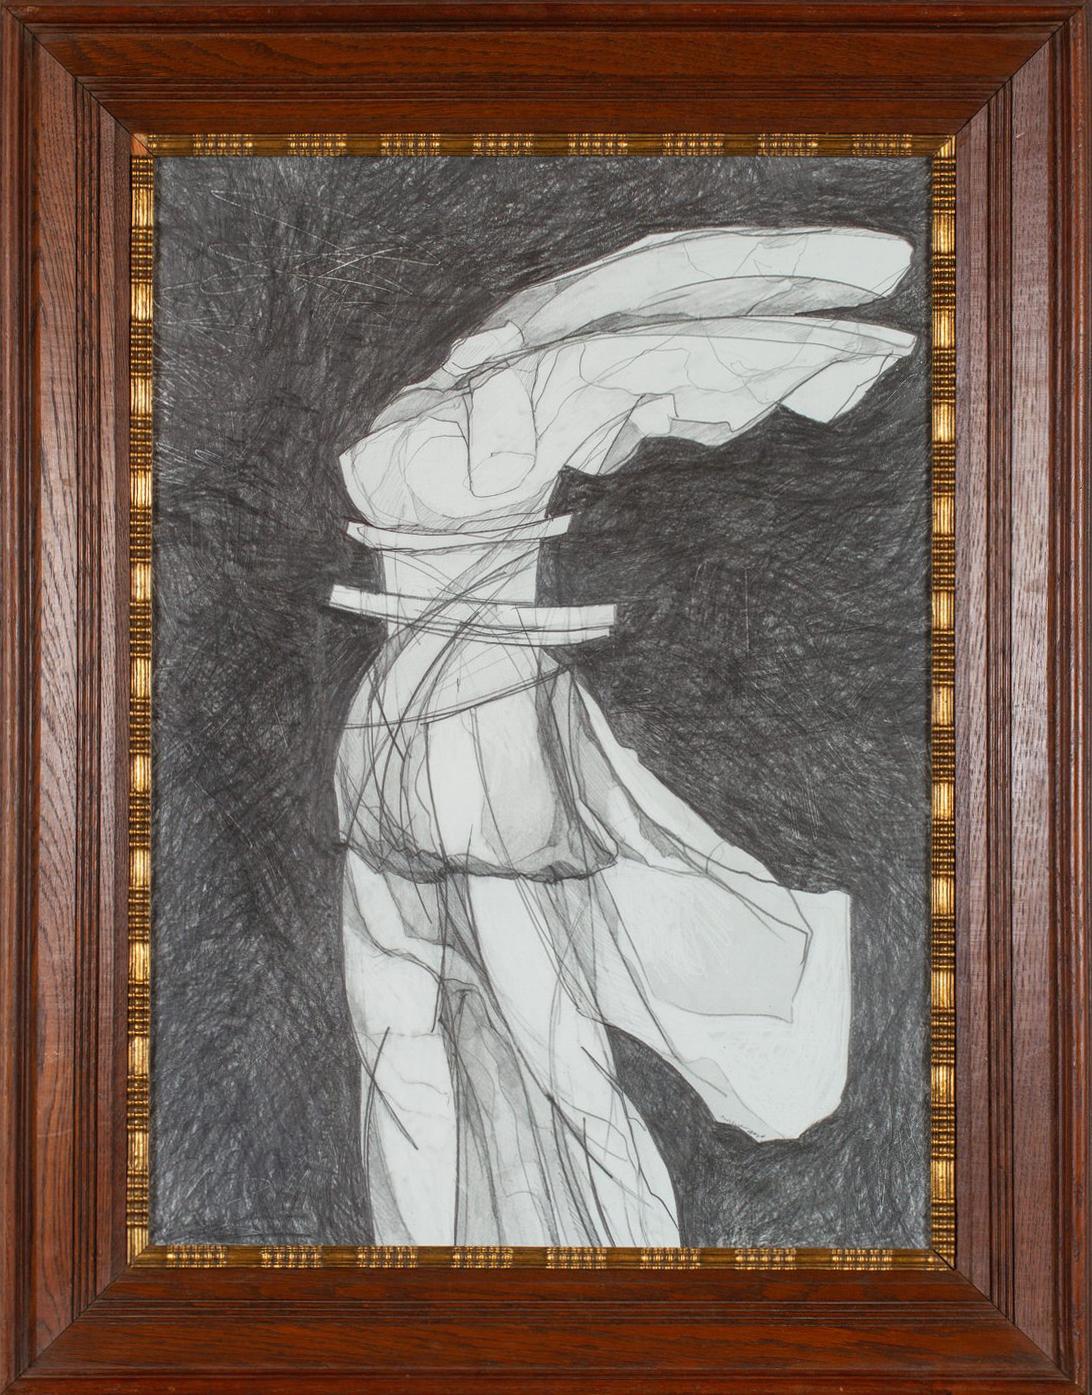 David Dew Bruner Abstract Drawing - Nike VI: Figurative Abstract Graphite Drawing of Goddess Nike, Antique Frame